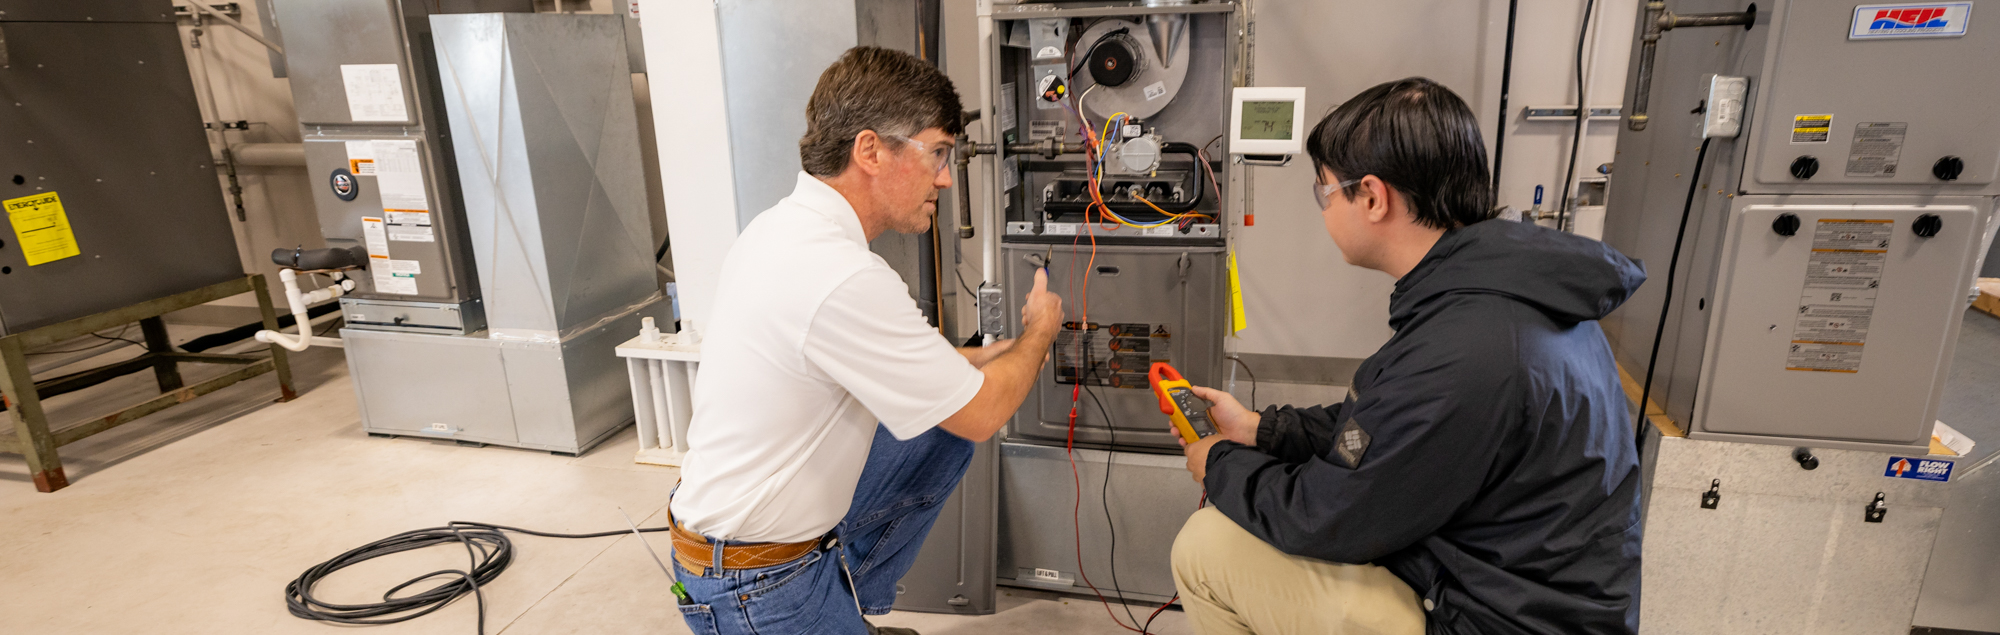 FDTC Professor demonstrates HVAC, heating and air conditioning, troubleshooting and repair